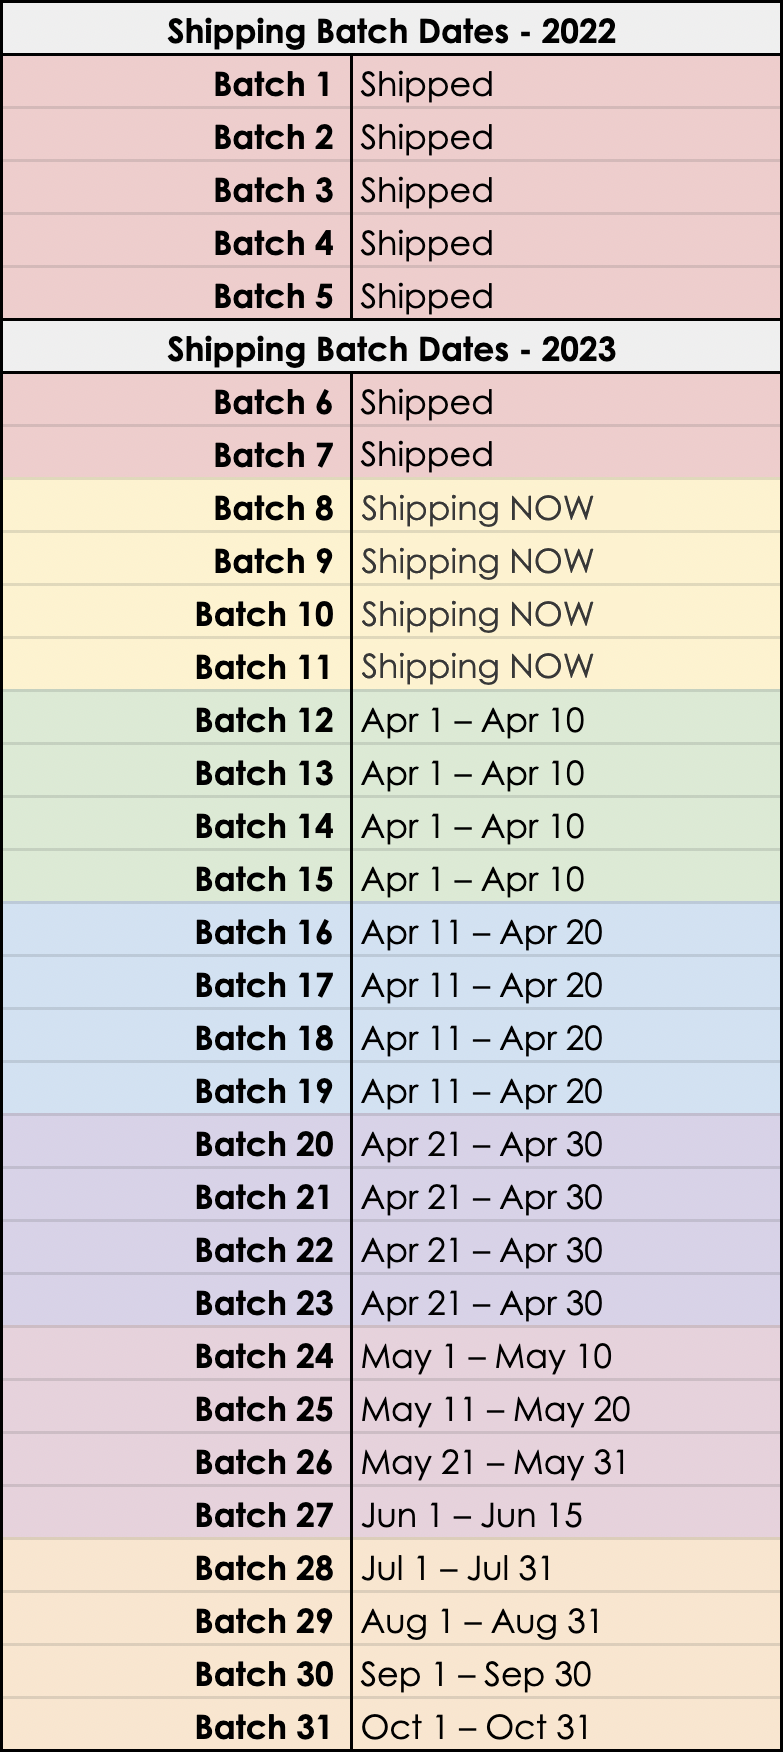 Shipping batches